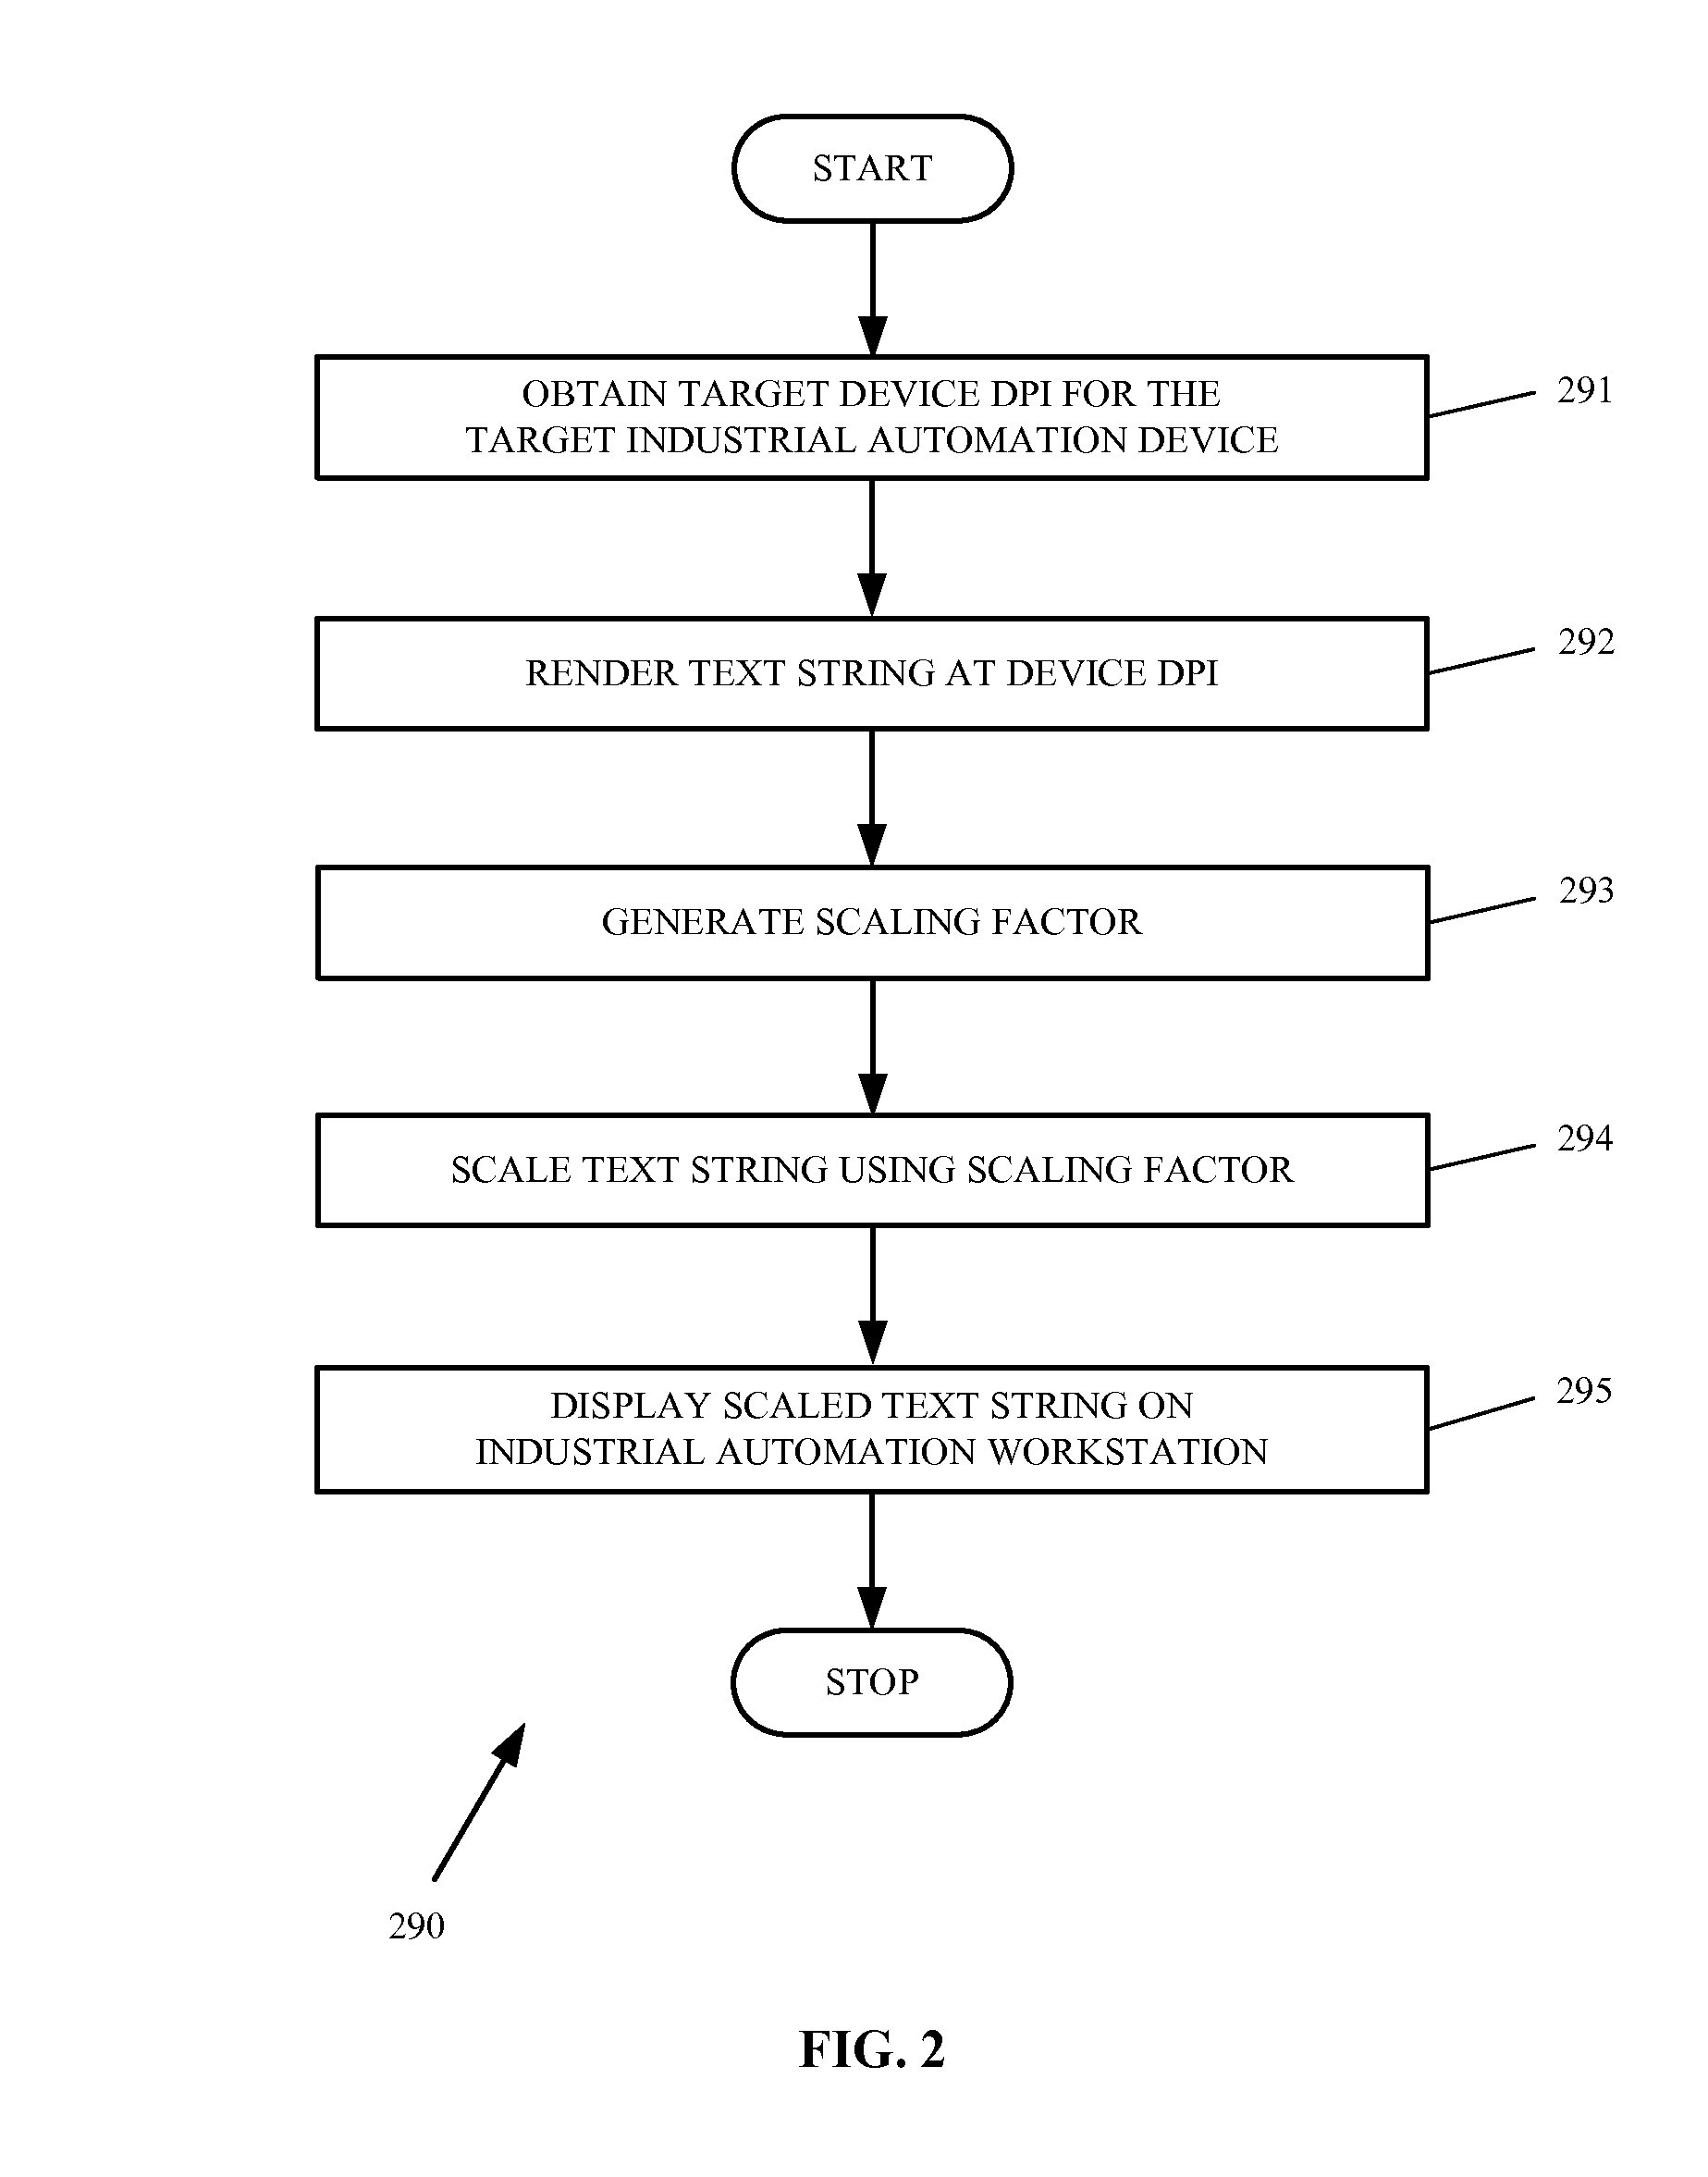 Industrial automation workstation and display method for scaling and displaying text destined for a target industrial automation device